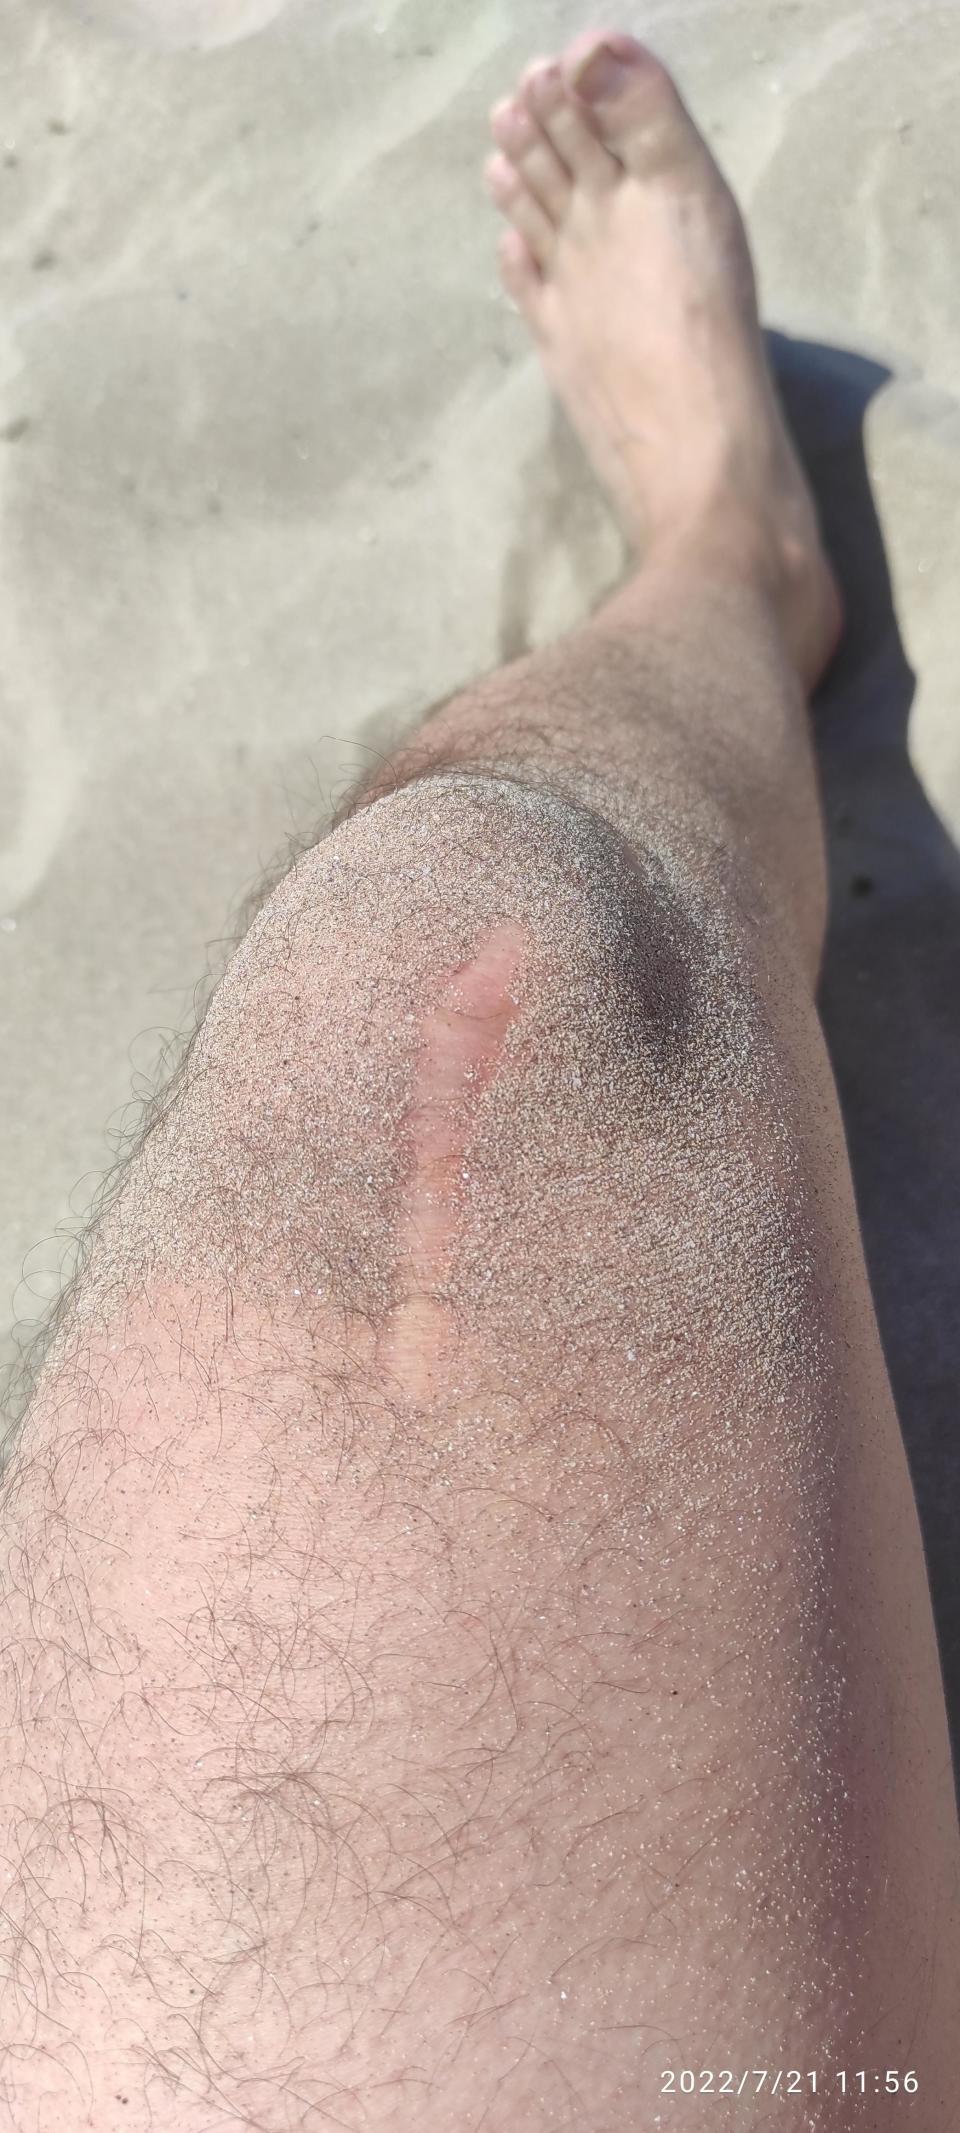 A person's leg covered in sand